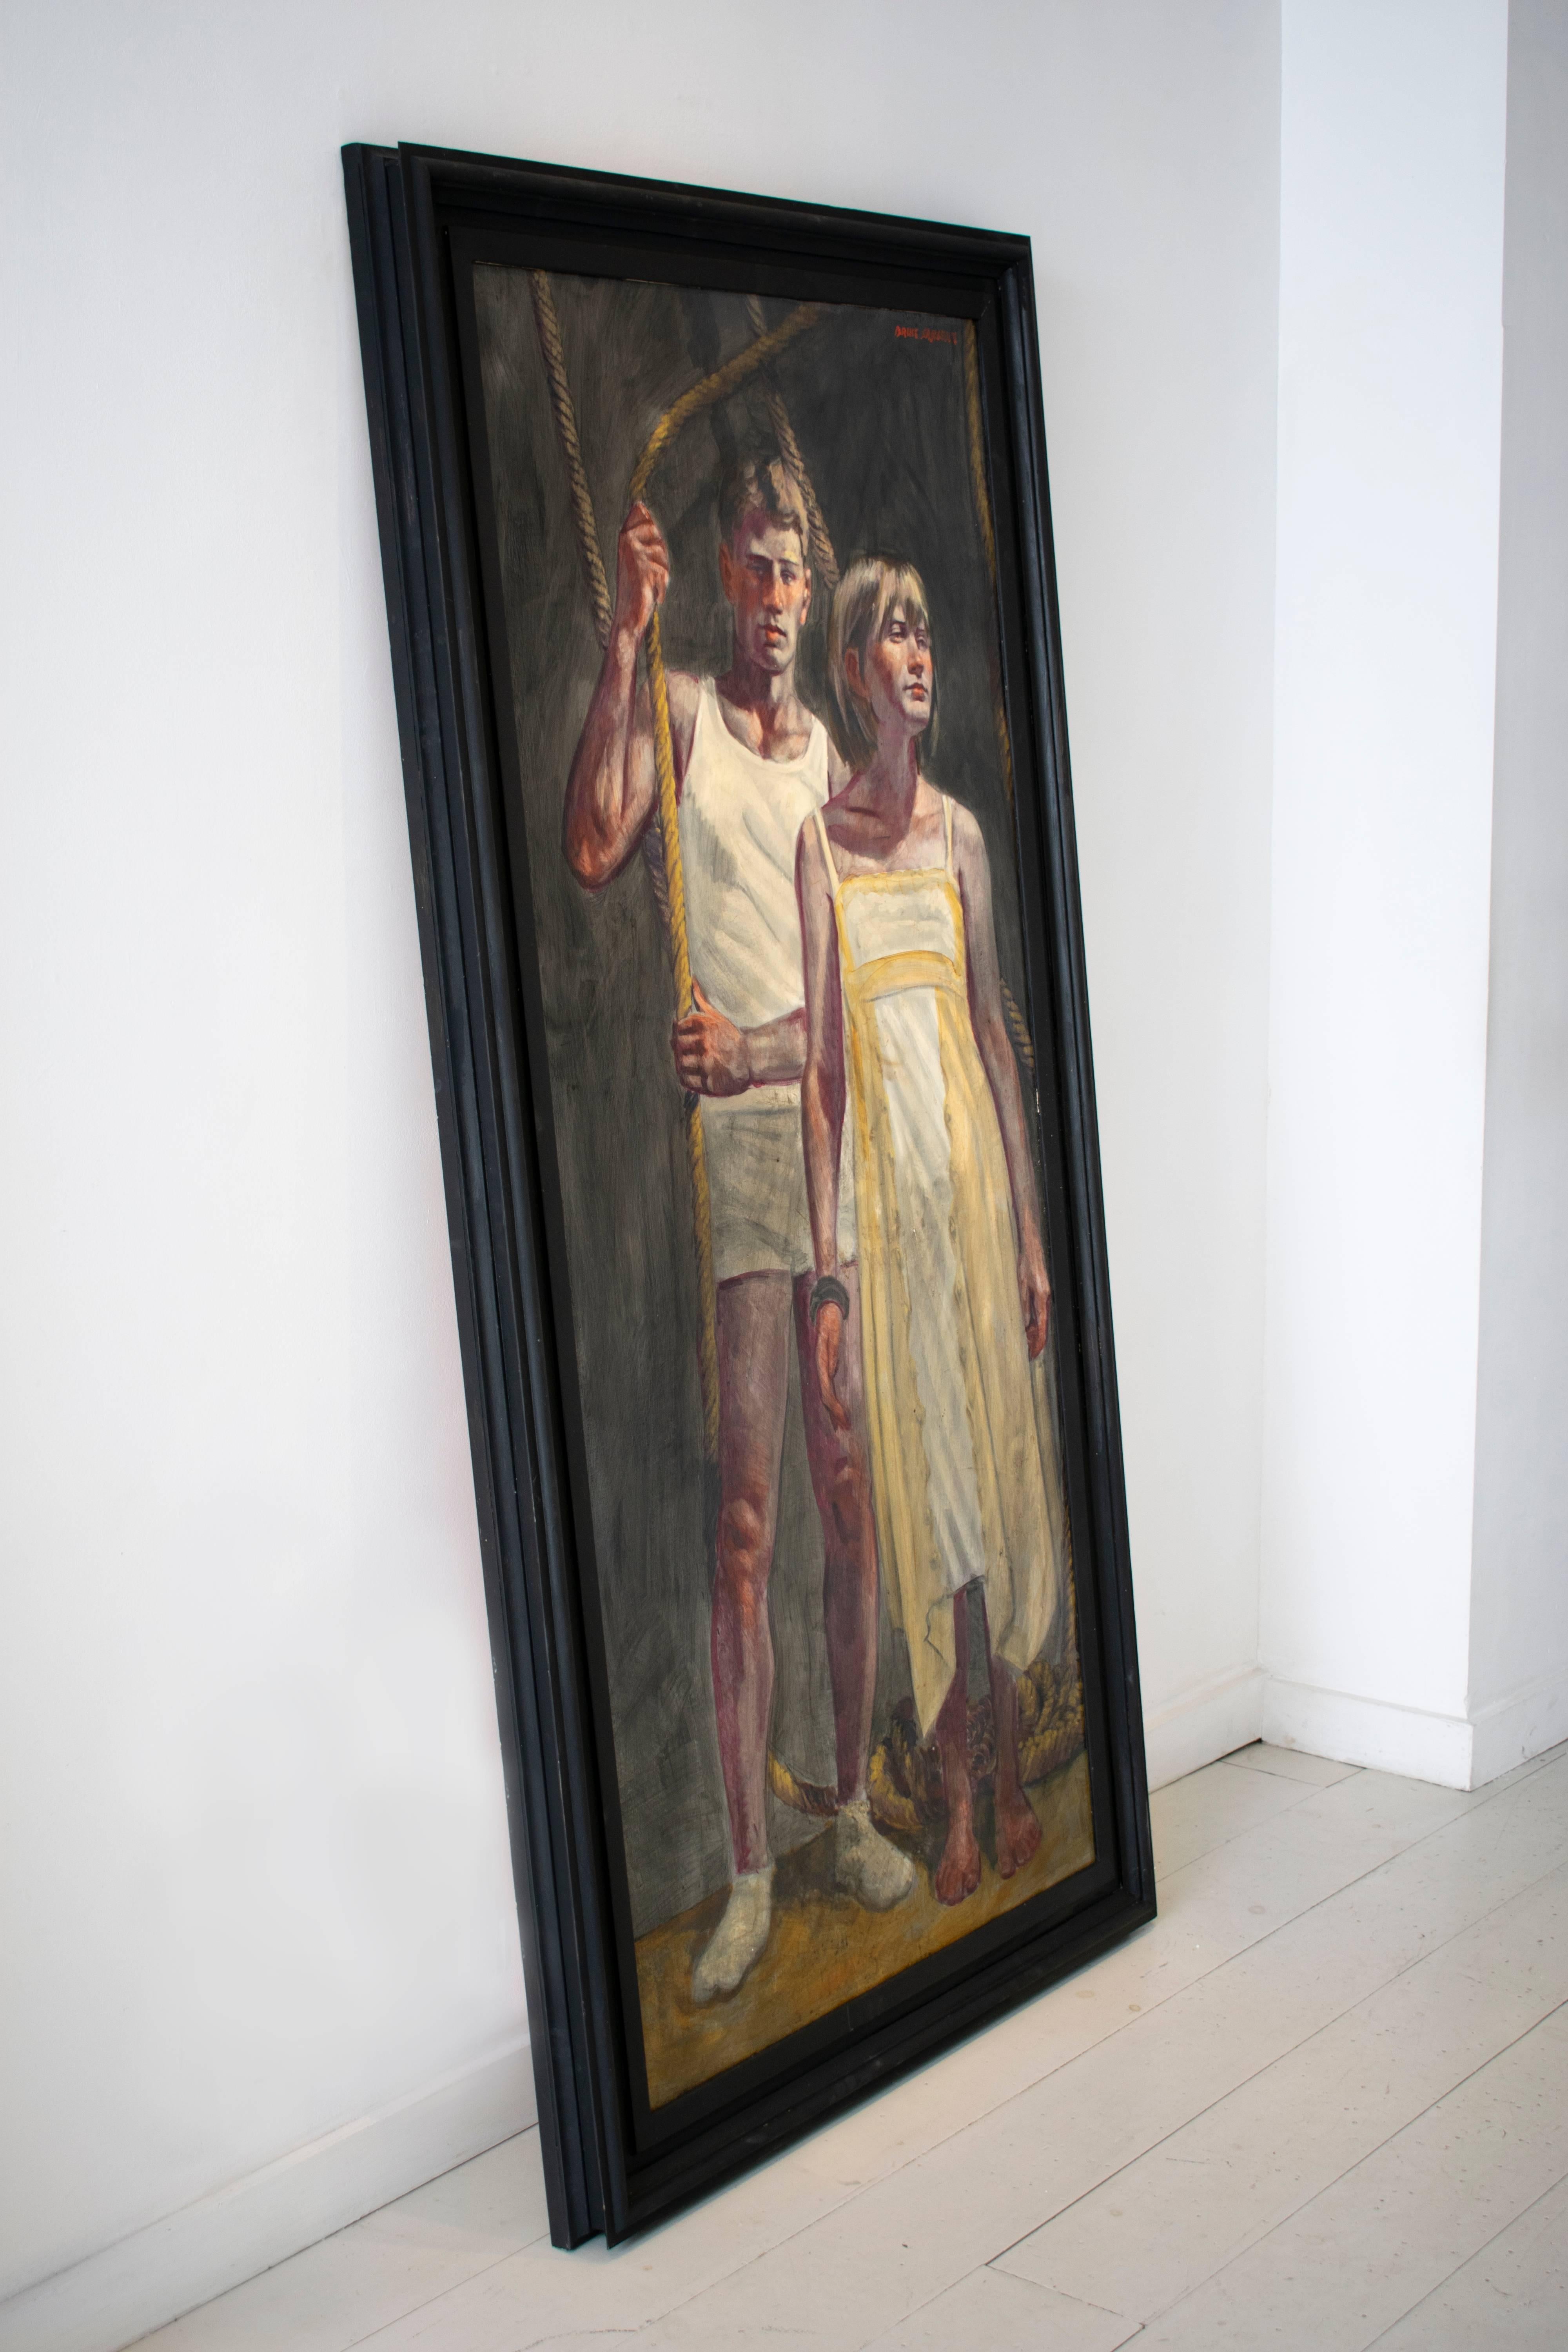 Academic style verticle figurative painting of an athletic male model and a girl in a yellow dress.
oil on canvas
55 X 19 1/2